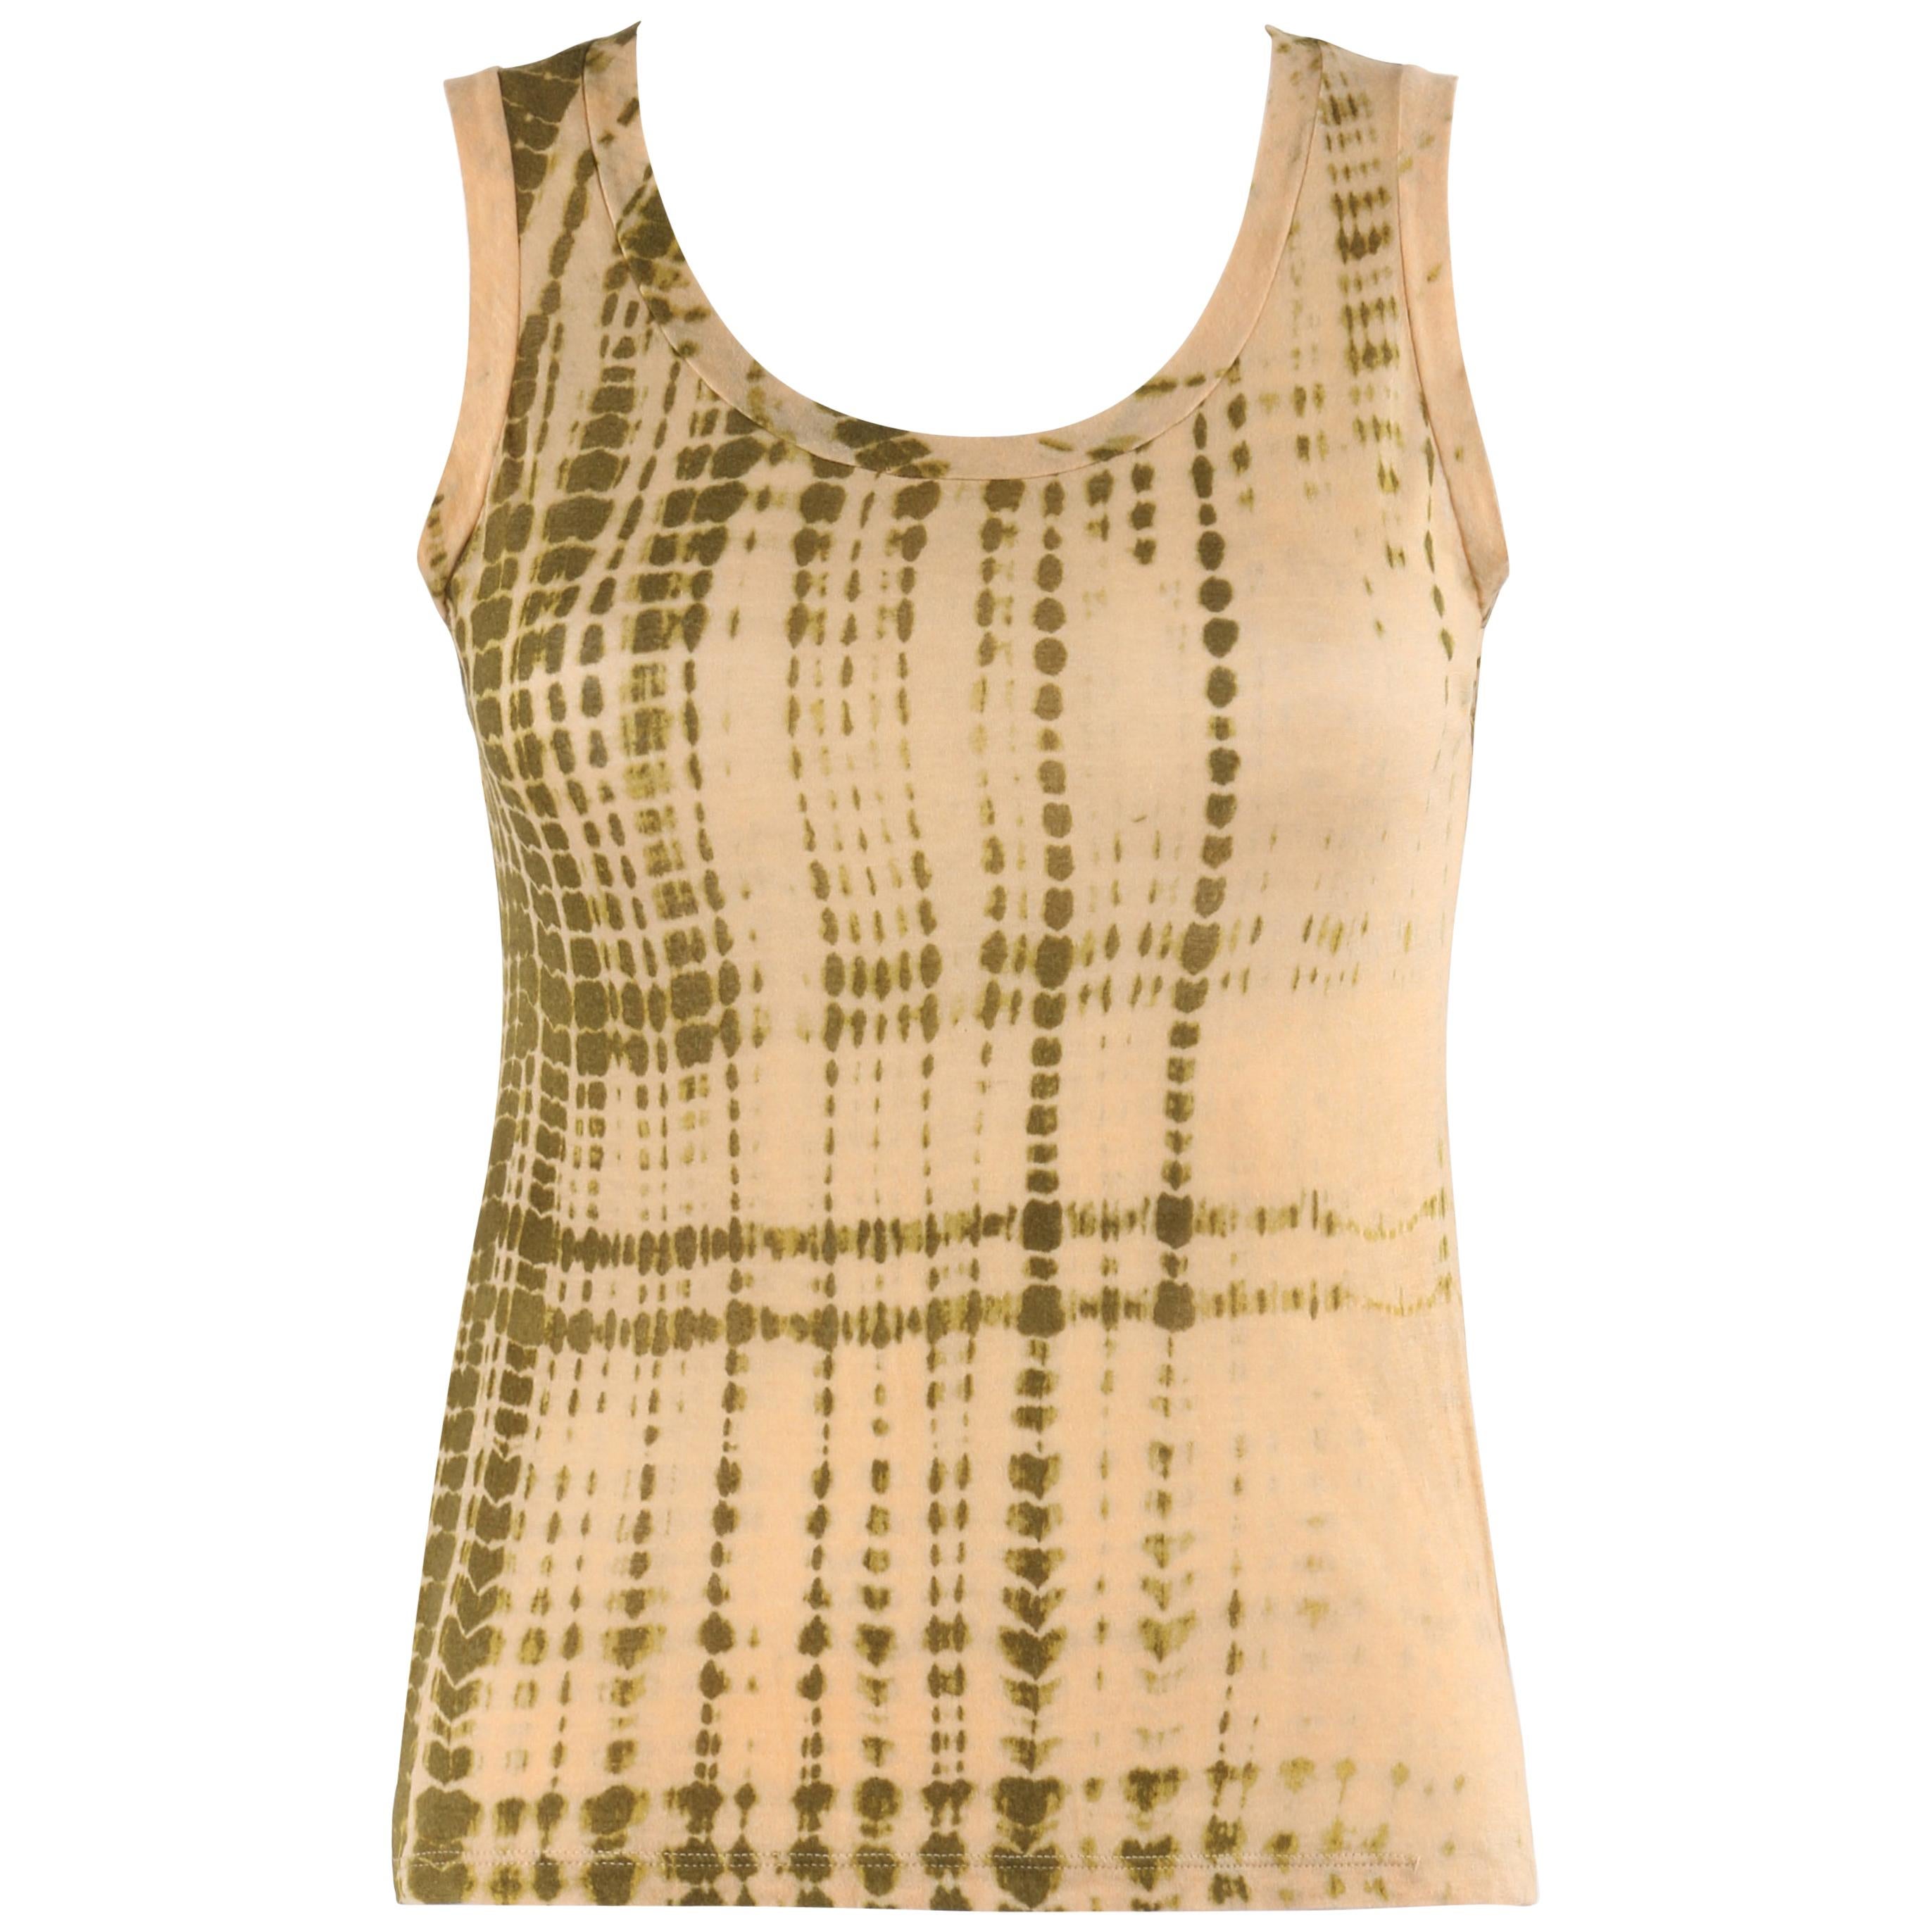 ALEXANDER McQUEEN S/S 2005 “It’s Only A Game” Tan Olive Tie Dye Print Tank Top For Sale